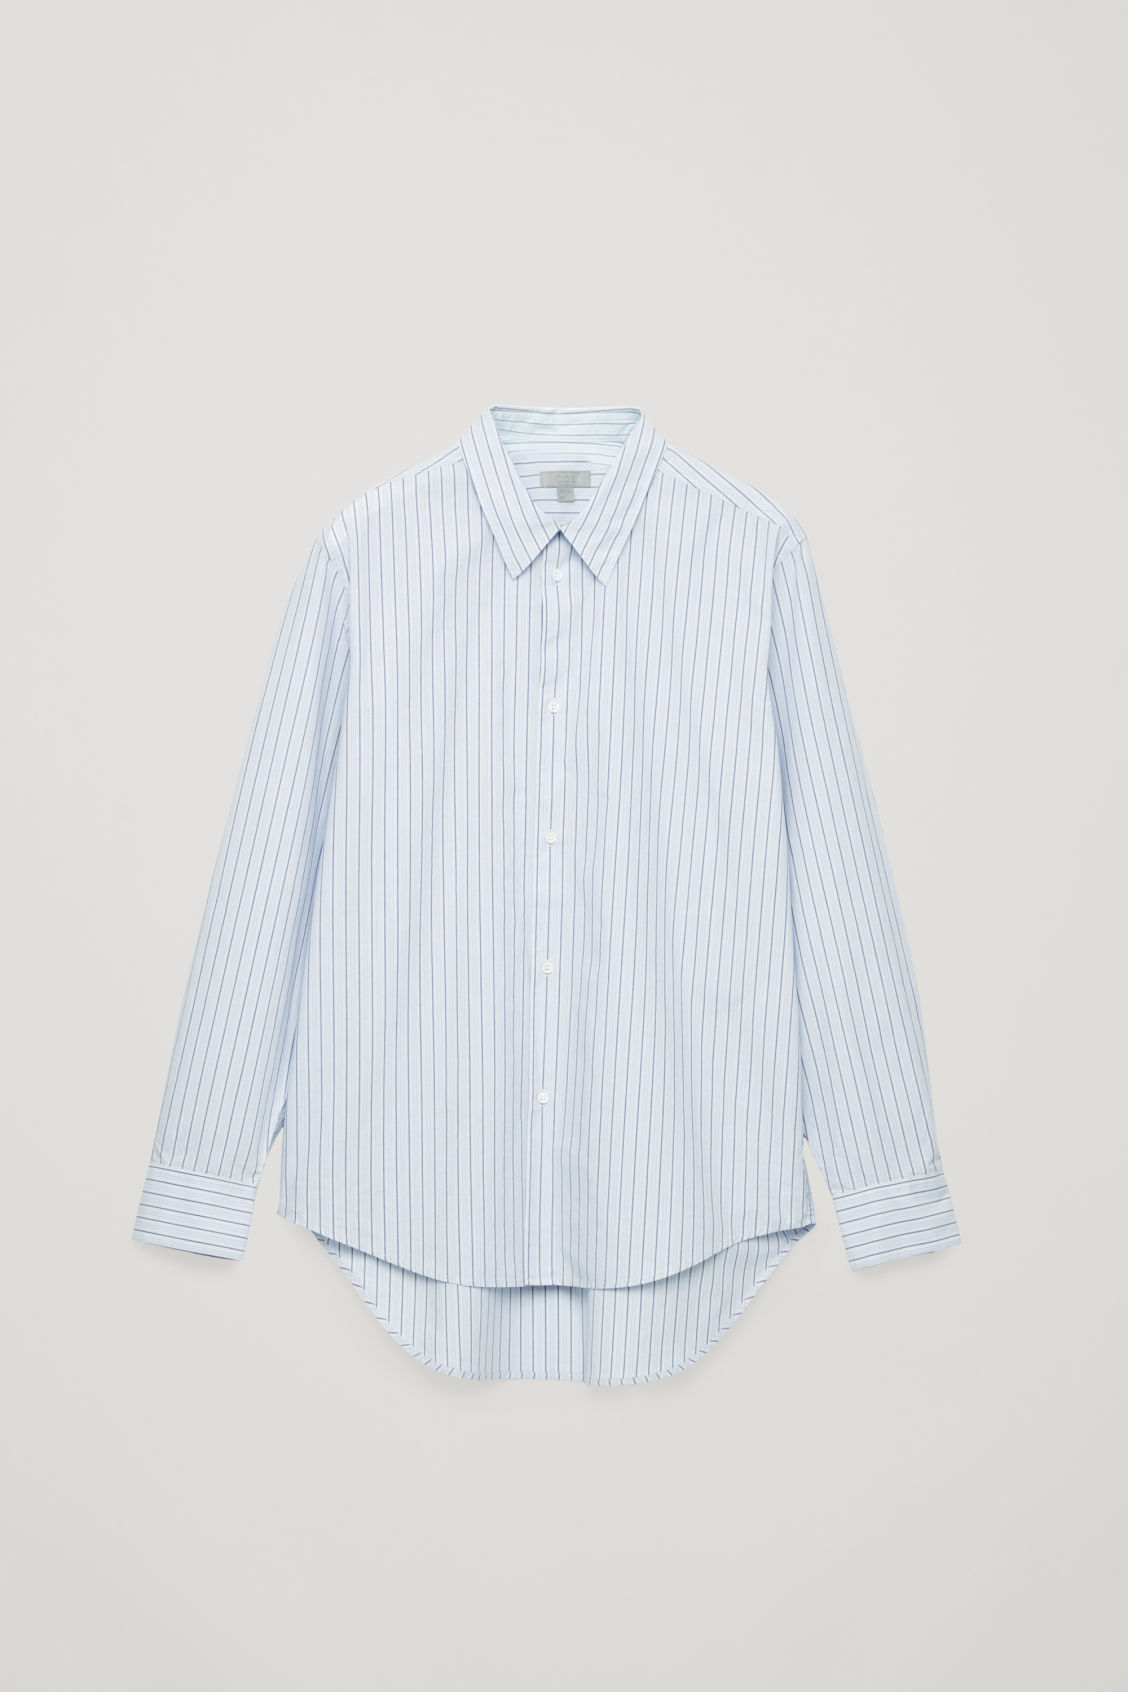 Cos Stepped Multi-striped Shirt In Blue | ModeSens